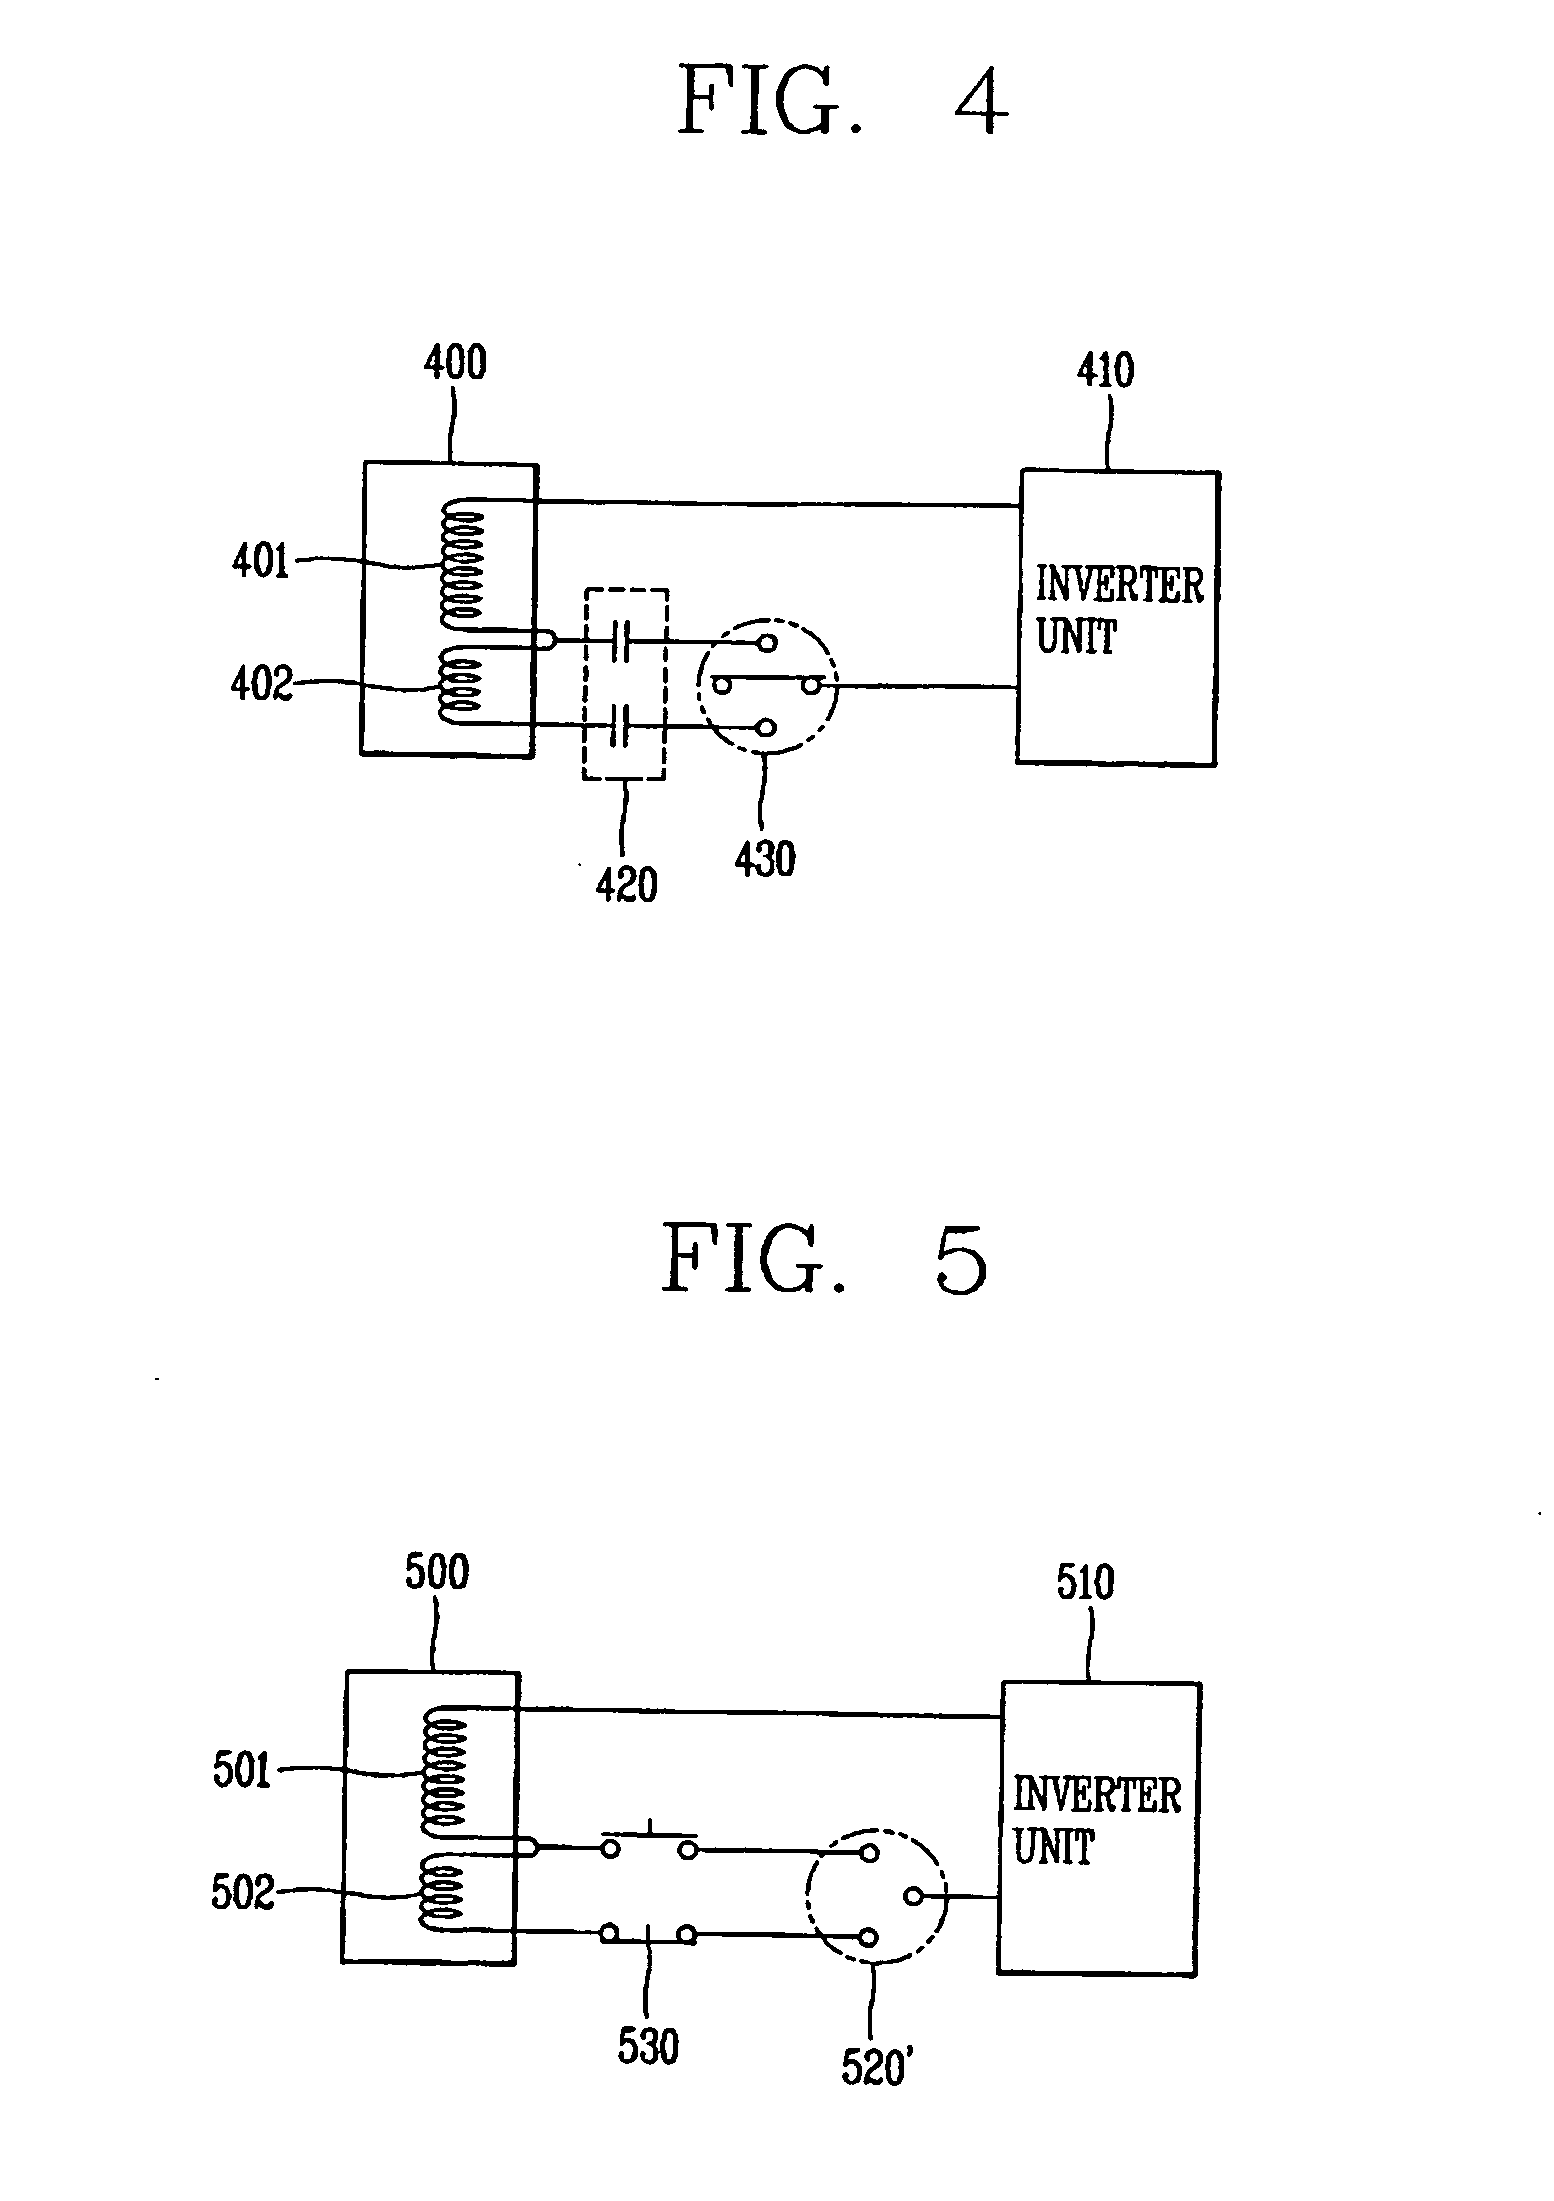 Apparatus and method for controlling linear compressor with inverter unit